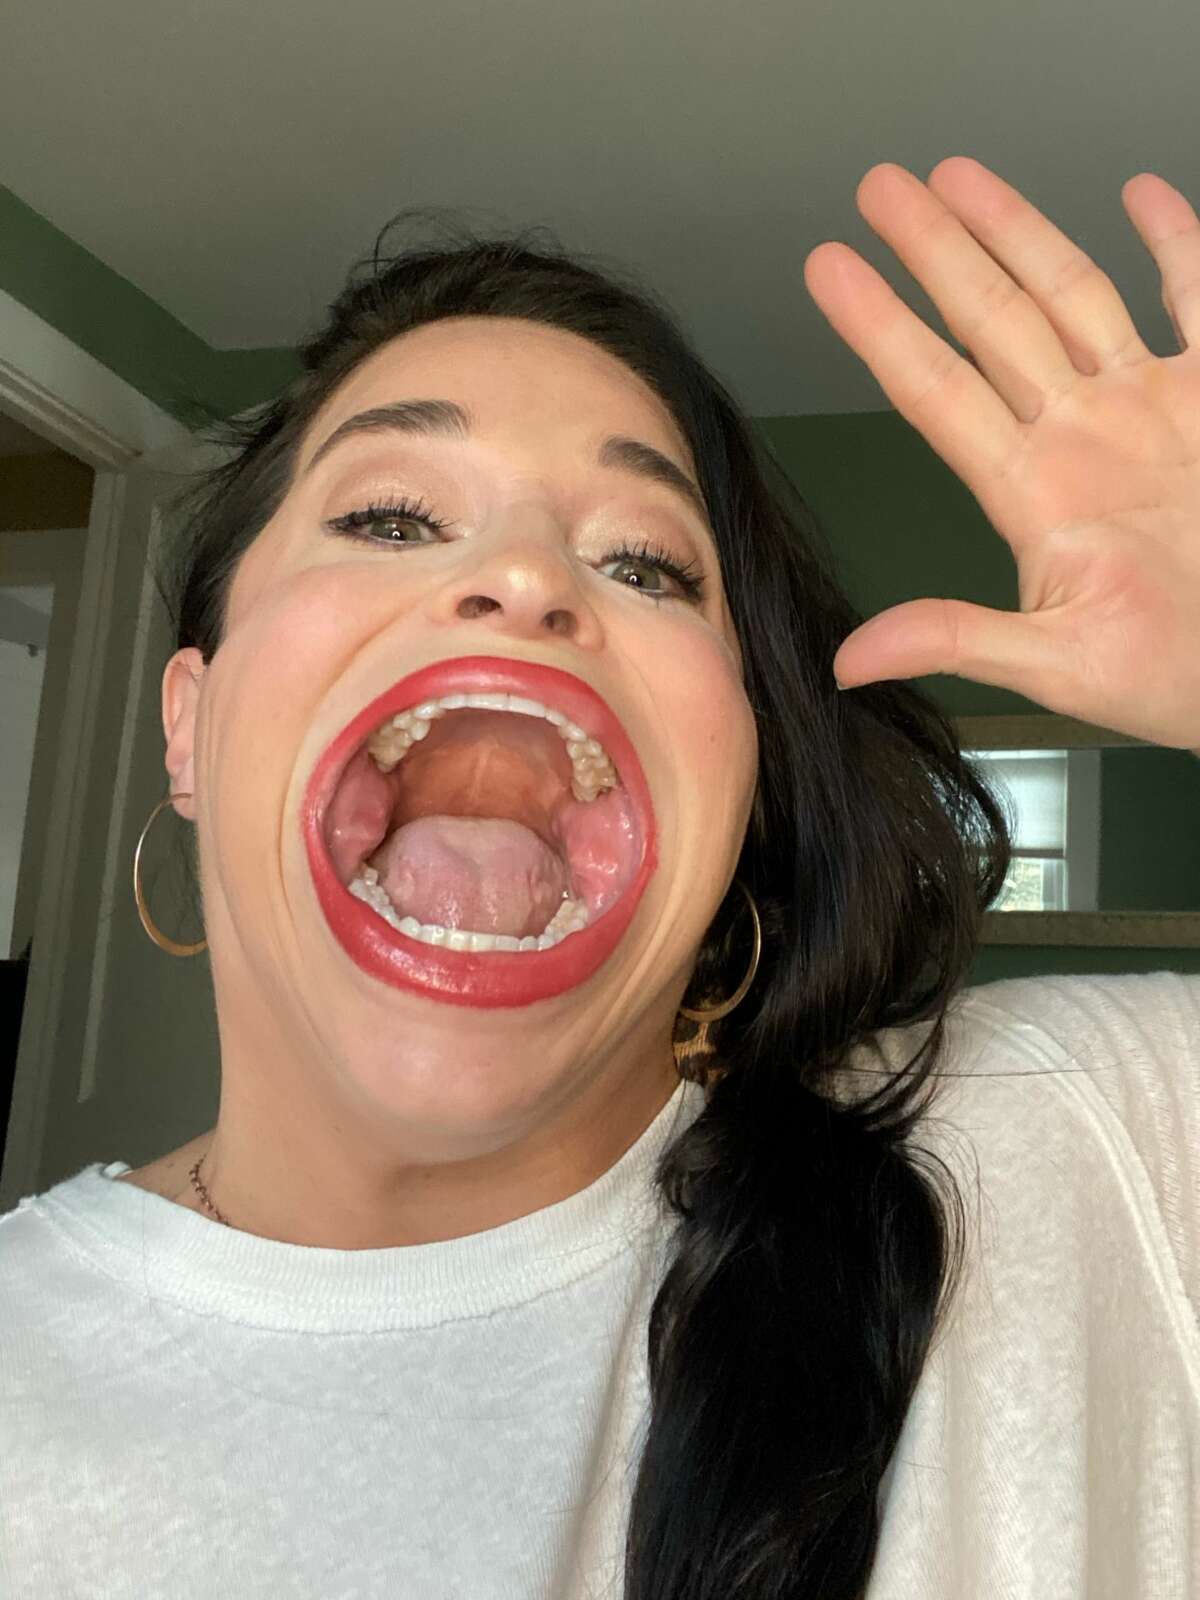 Stamford Woman Sets Guinness World Record For Largest Mouth Gape 5850